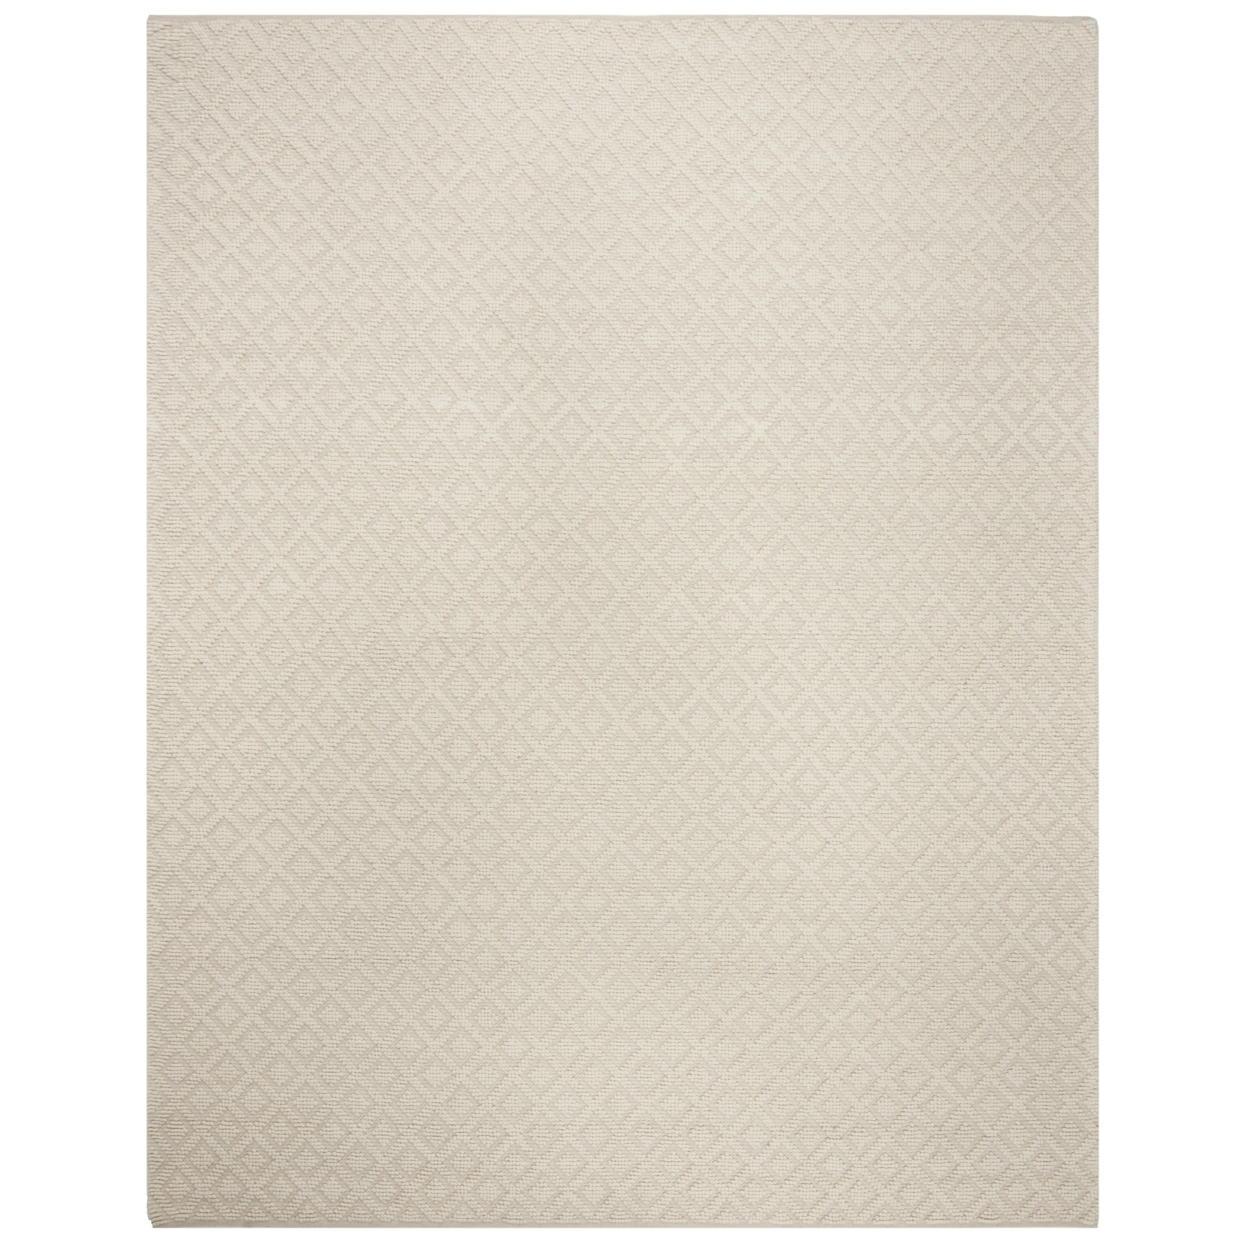 SAFAVIEH Vermont Collection VRM104A Handwoven Ivory Rug - 6 X 9